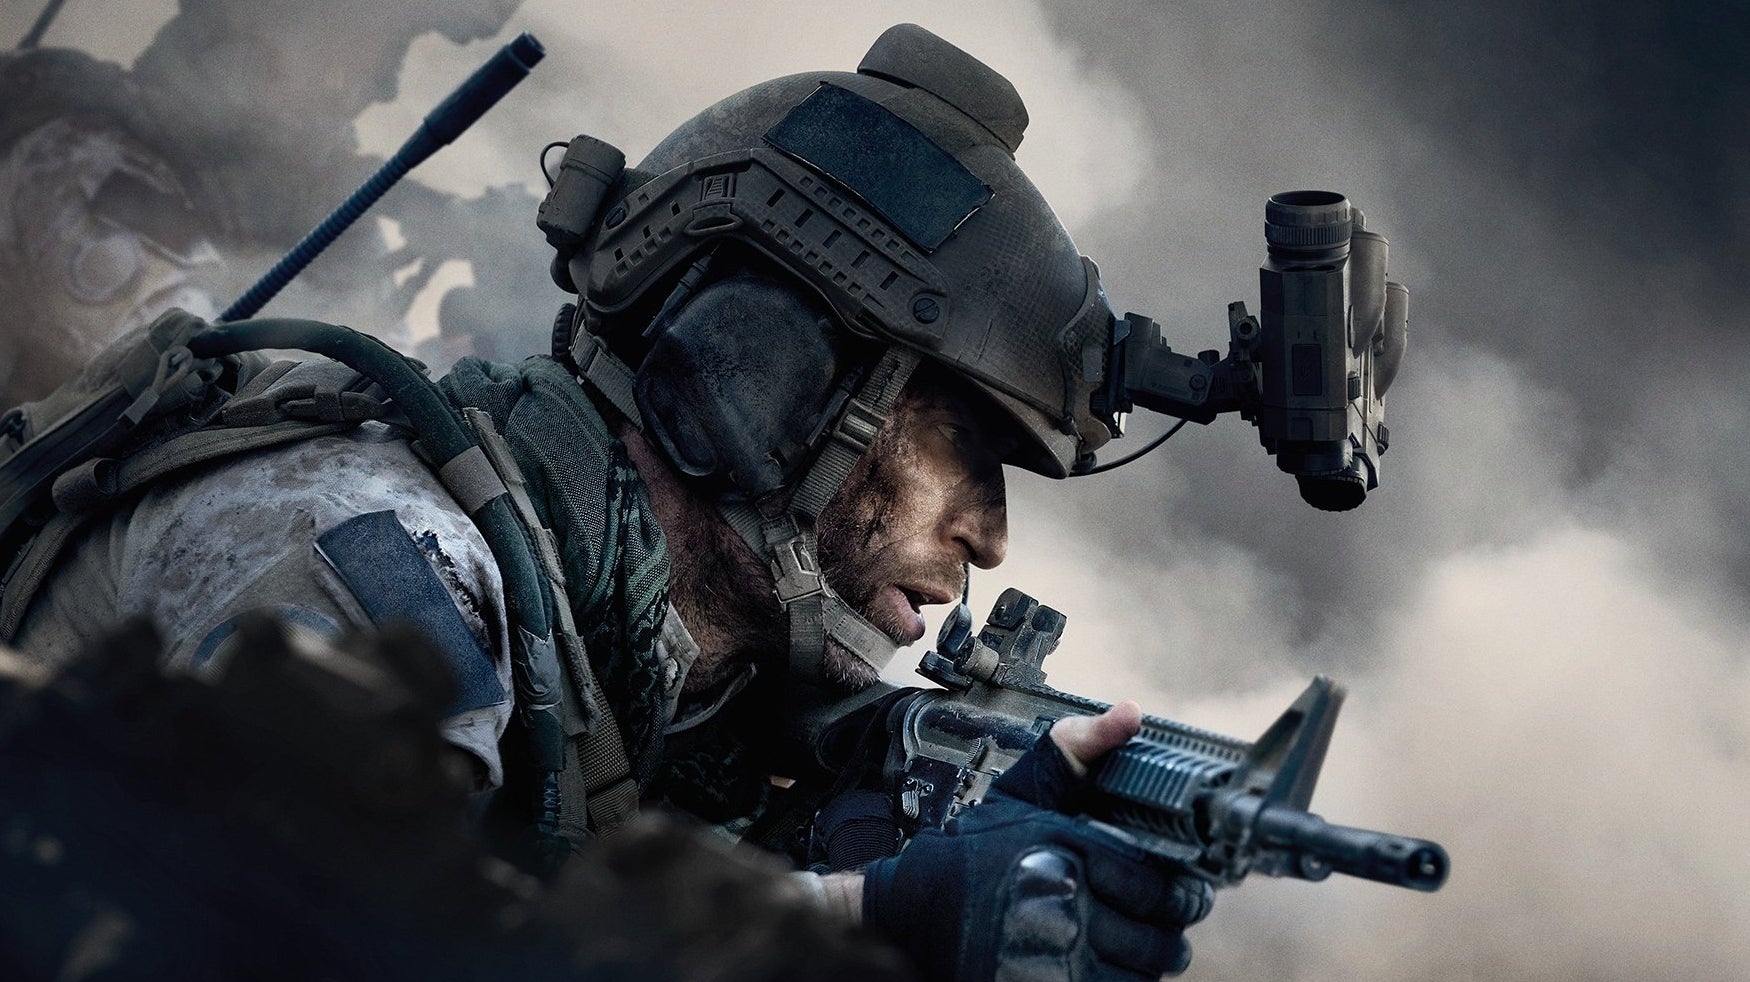 Image for This year's Call of Duty confirmed as Infinity Ward developed Modern Warfare sequel